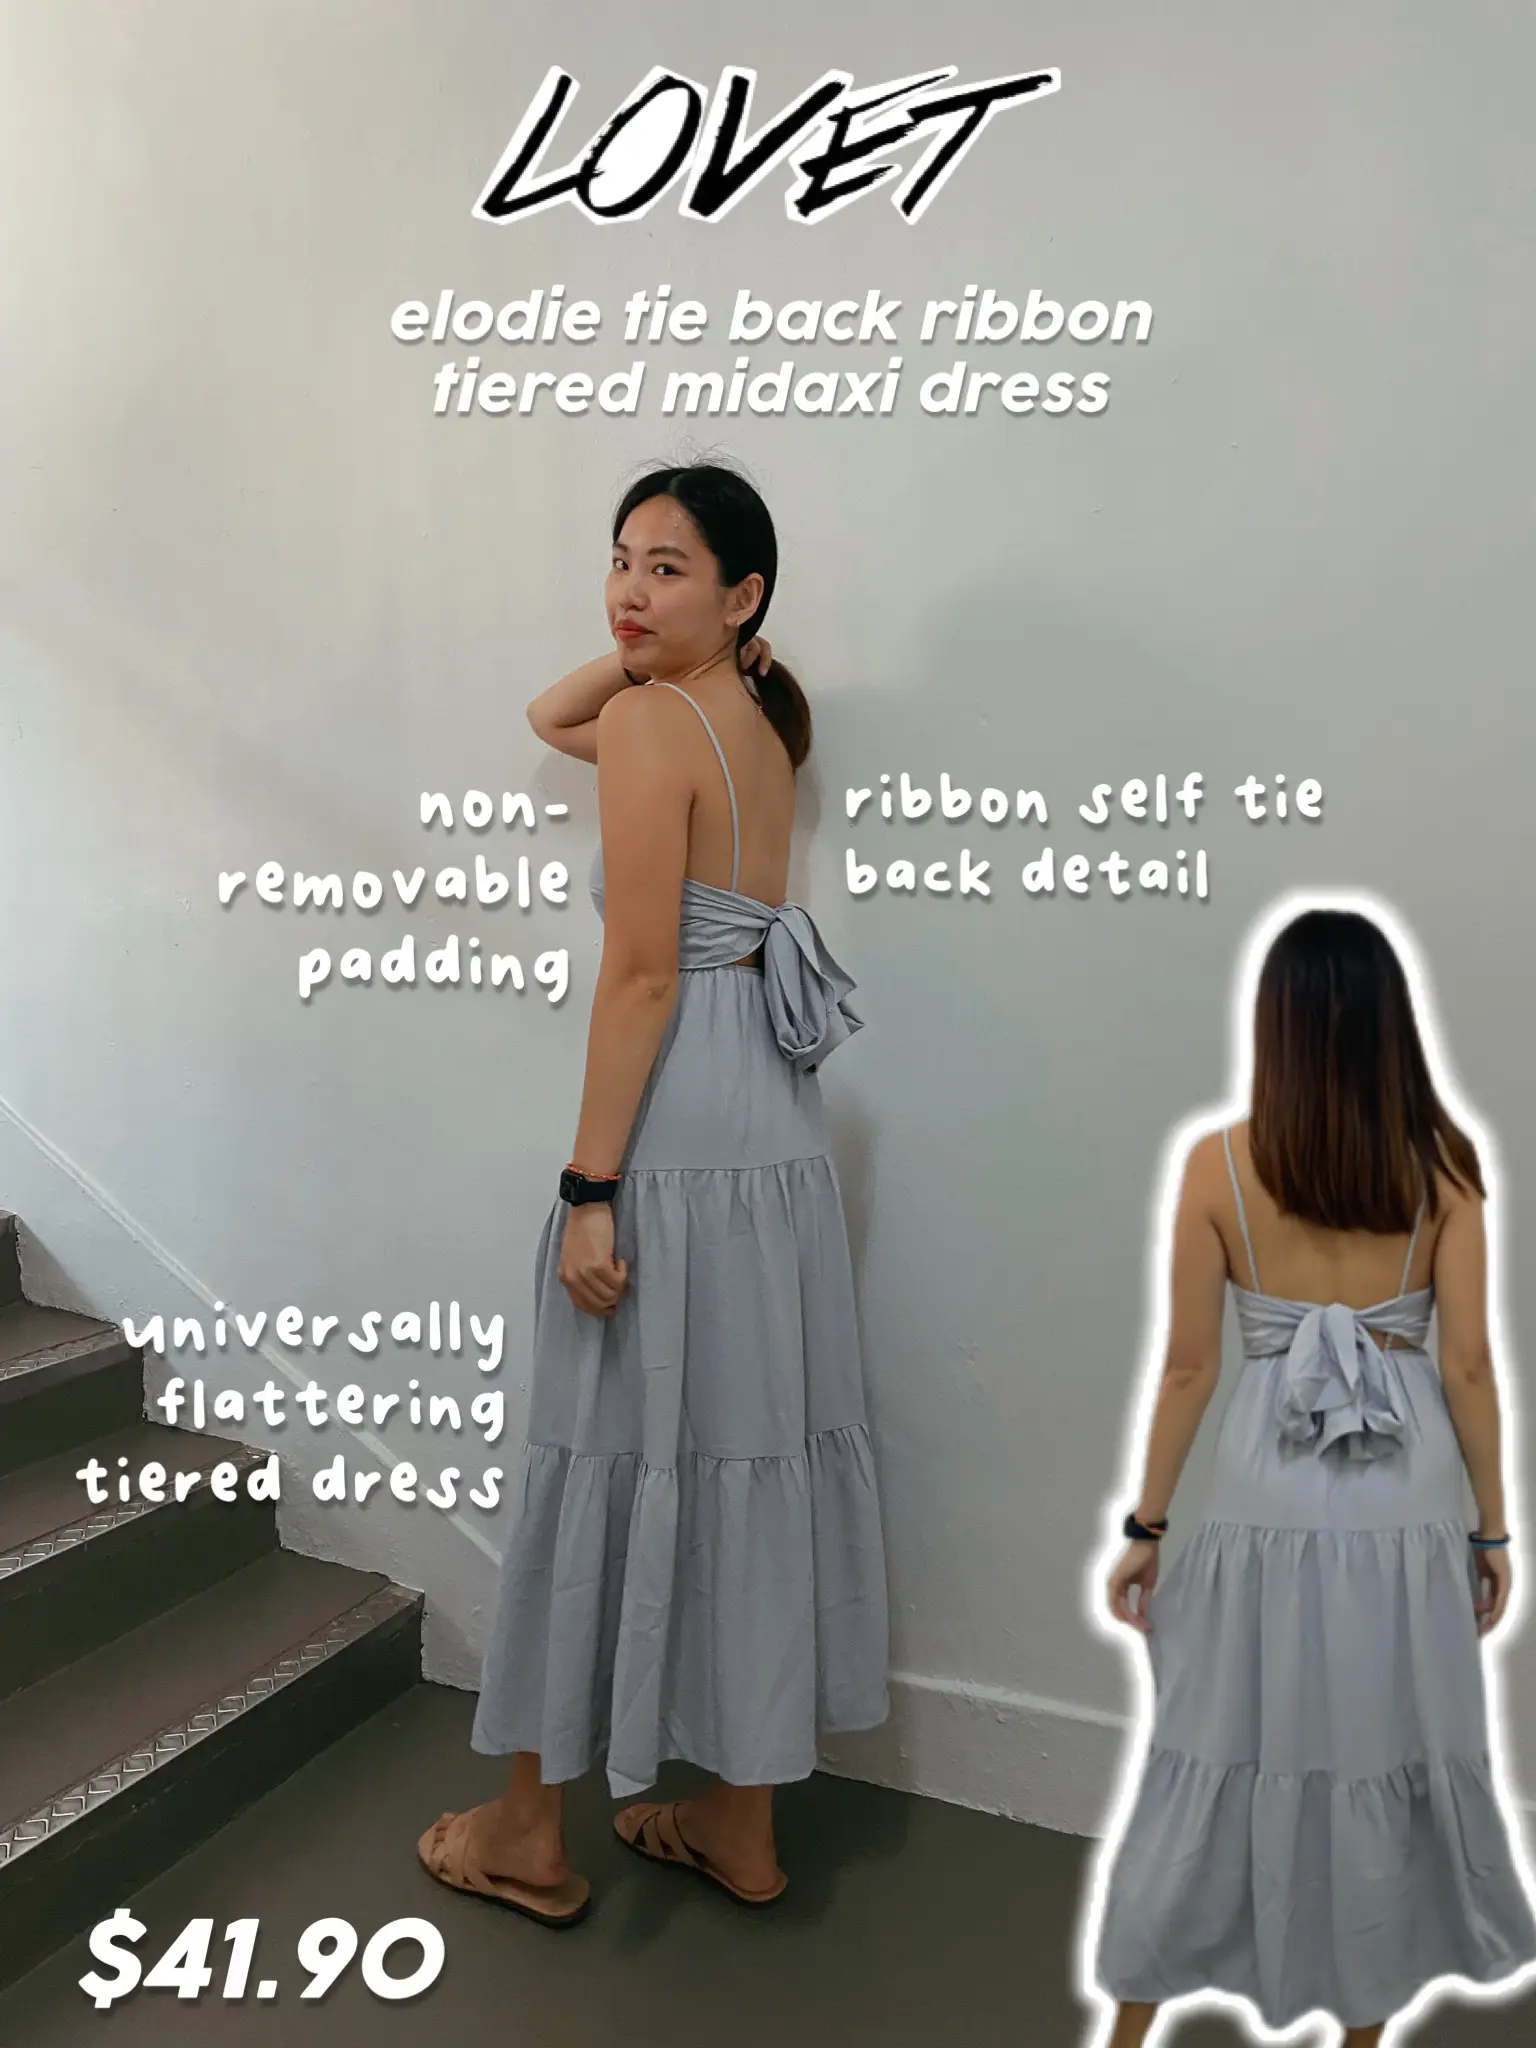 How to Add a Corset Back to a Dress That's Too Small - Too Much Love